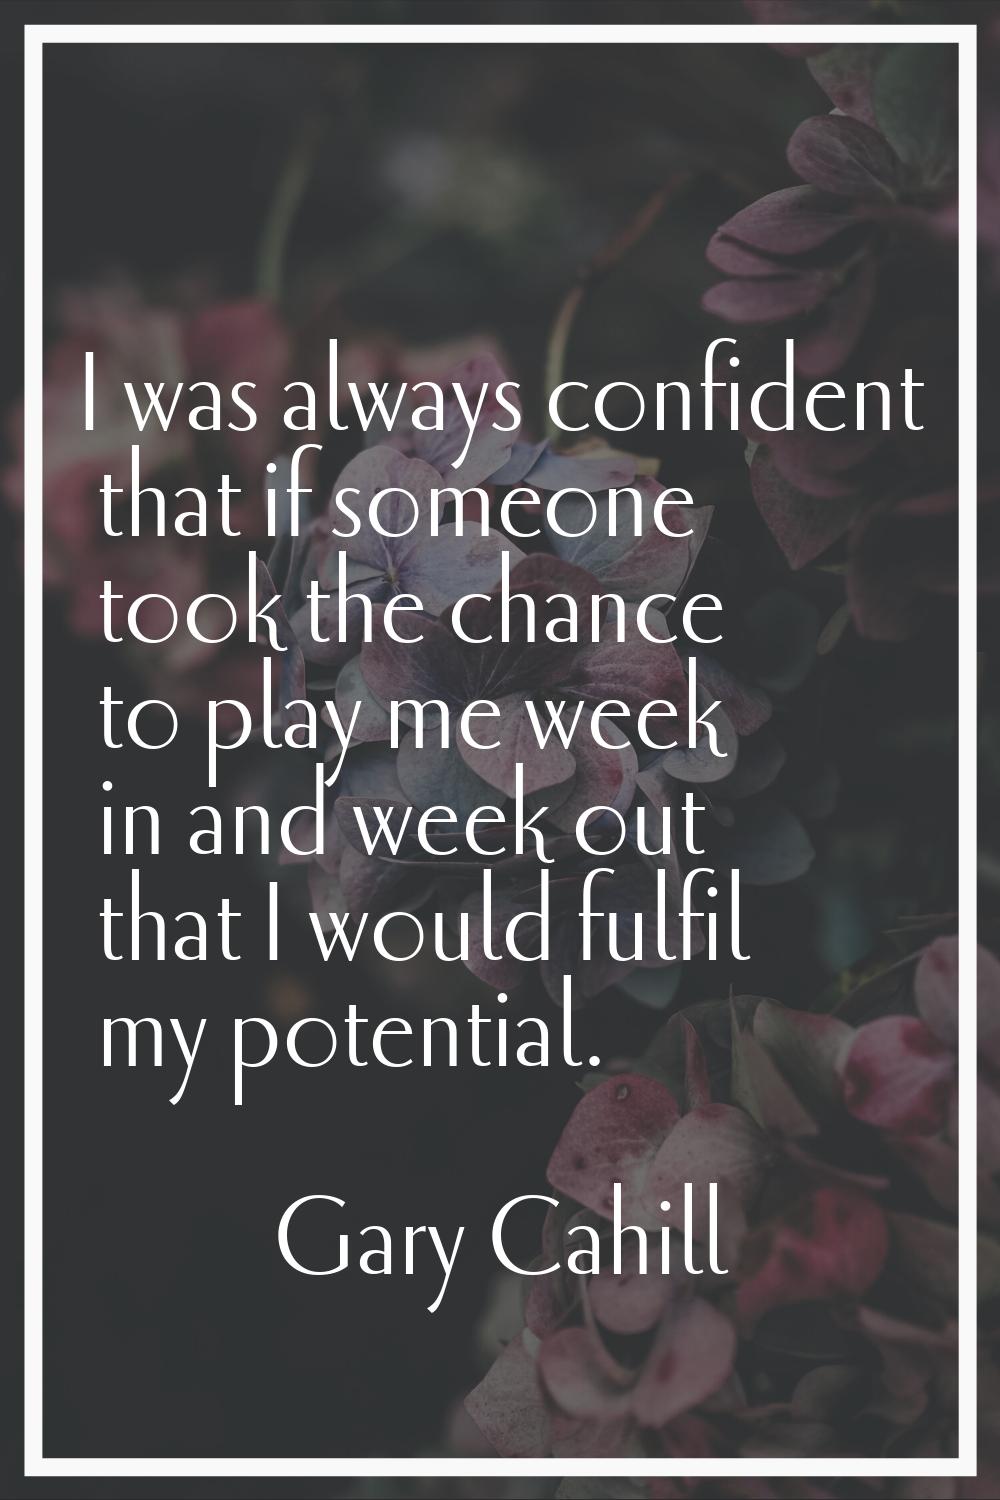 I was always confident that if someone took the chance to play me week in and week out that I would